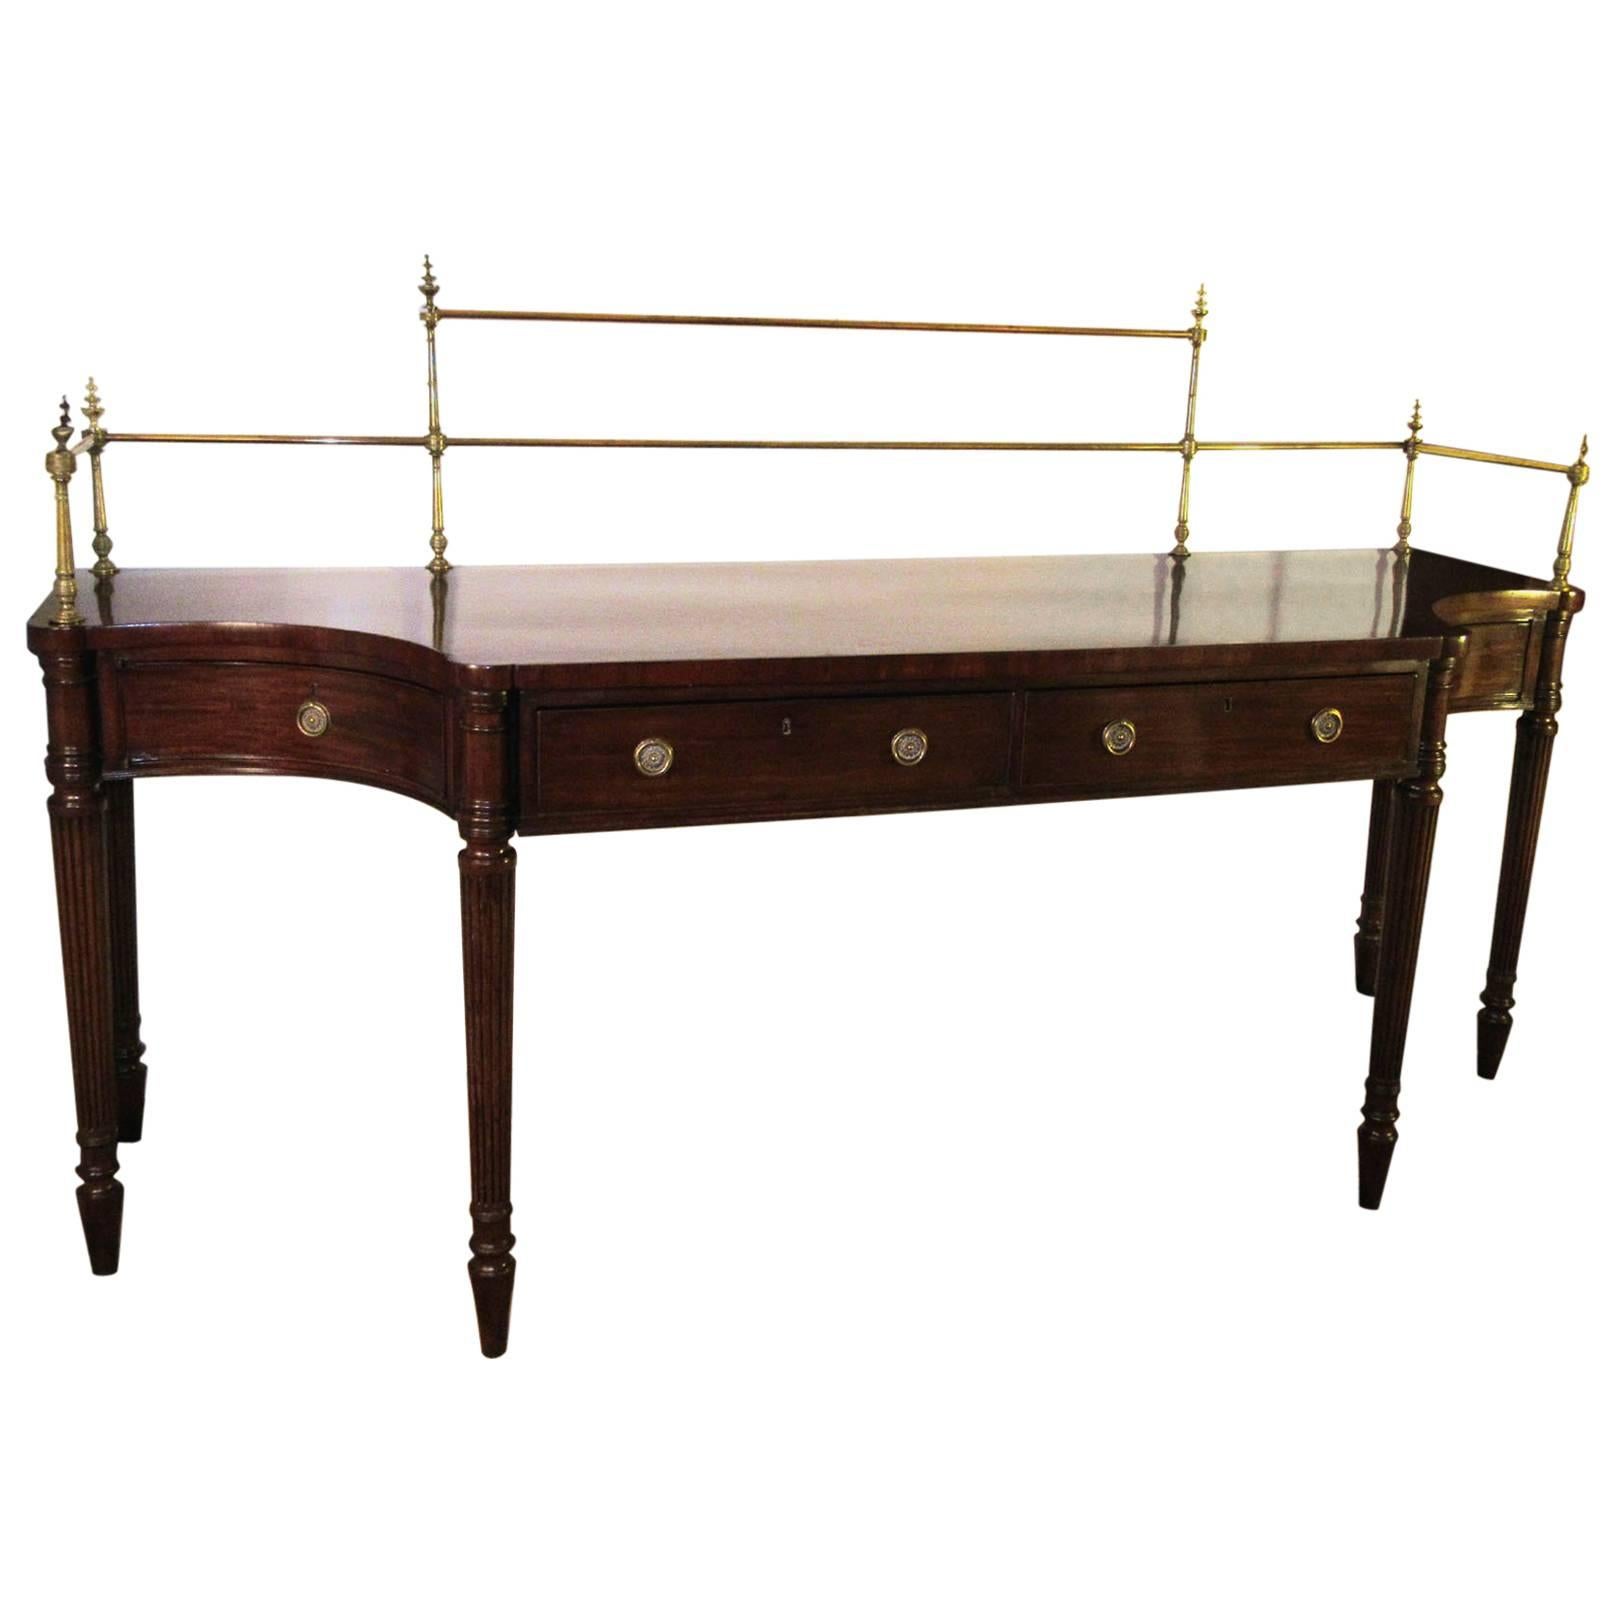 Early 19th Century English Sideboard with Brass Gallery